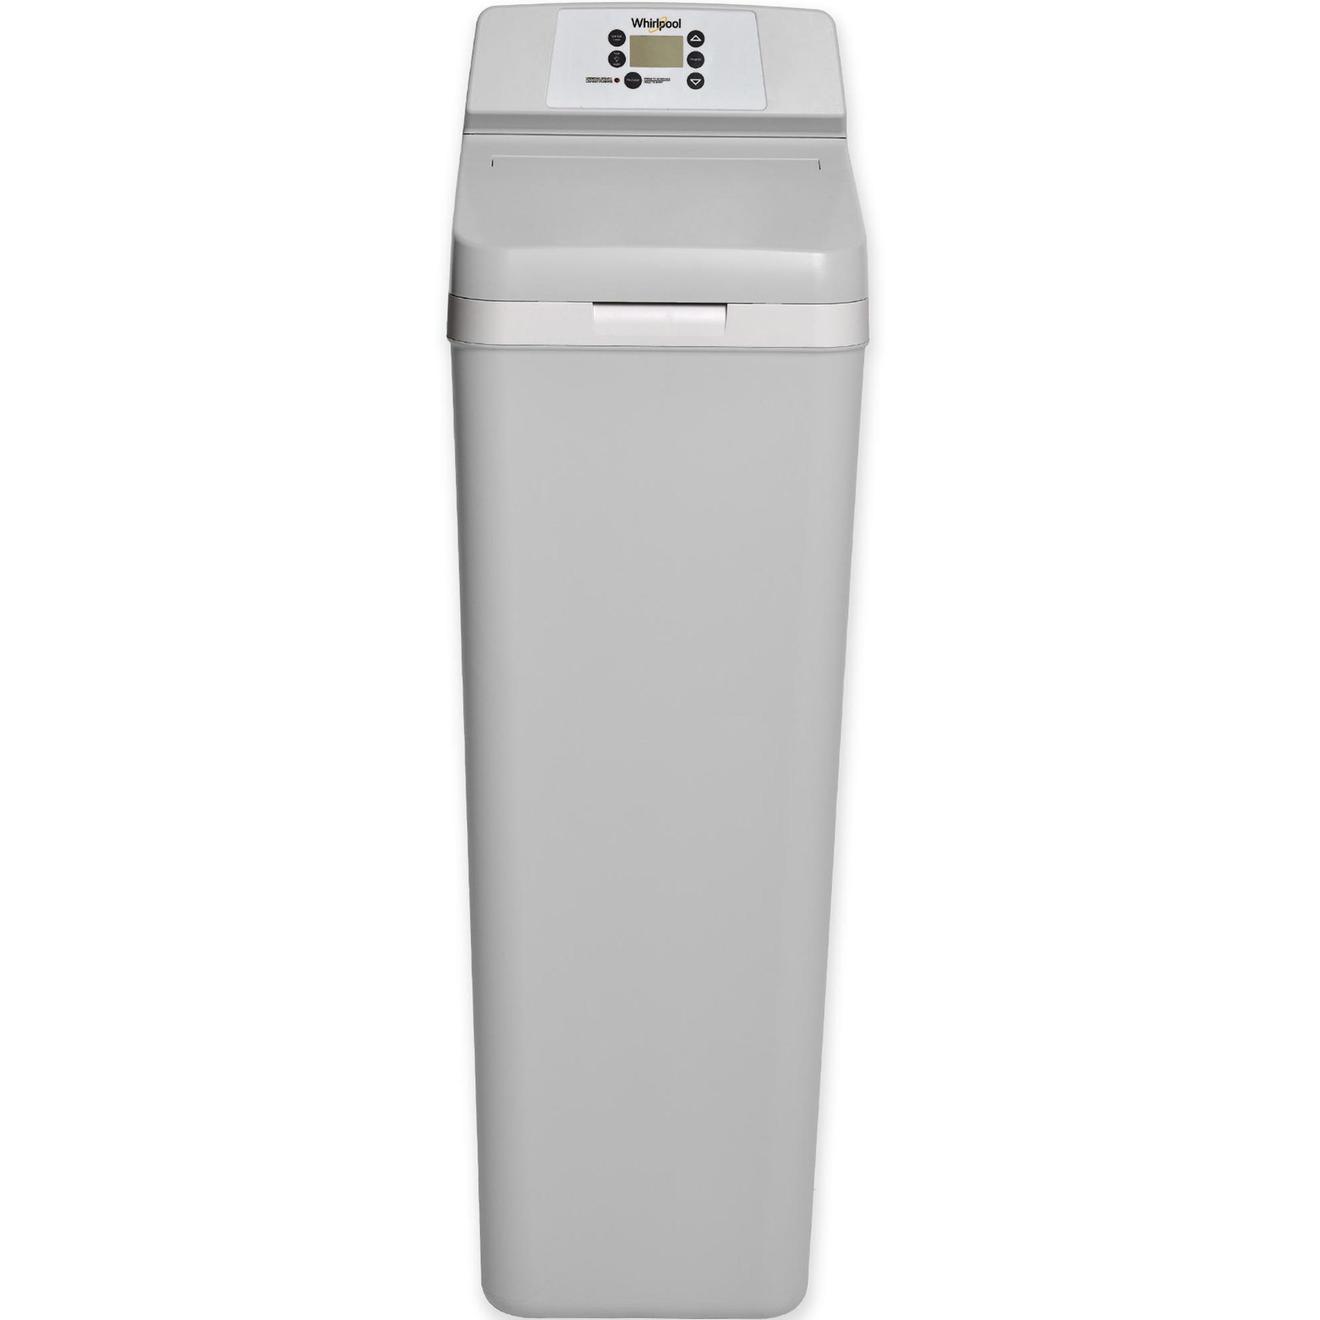 Whirlpool Water Softener offers at $799.98 in Trail Appliances